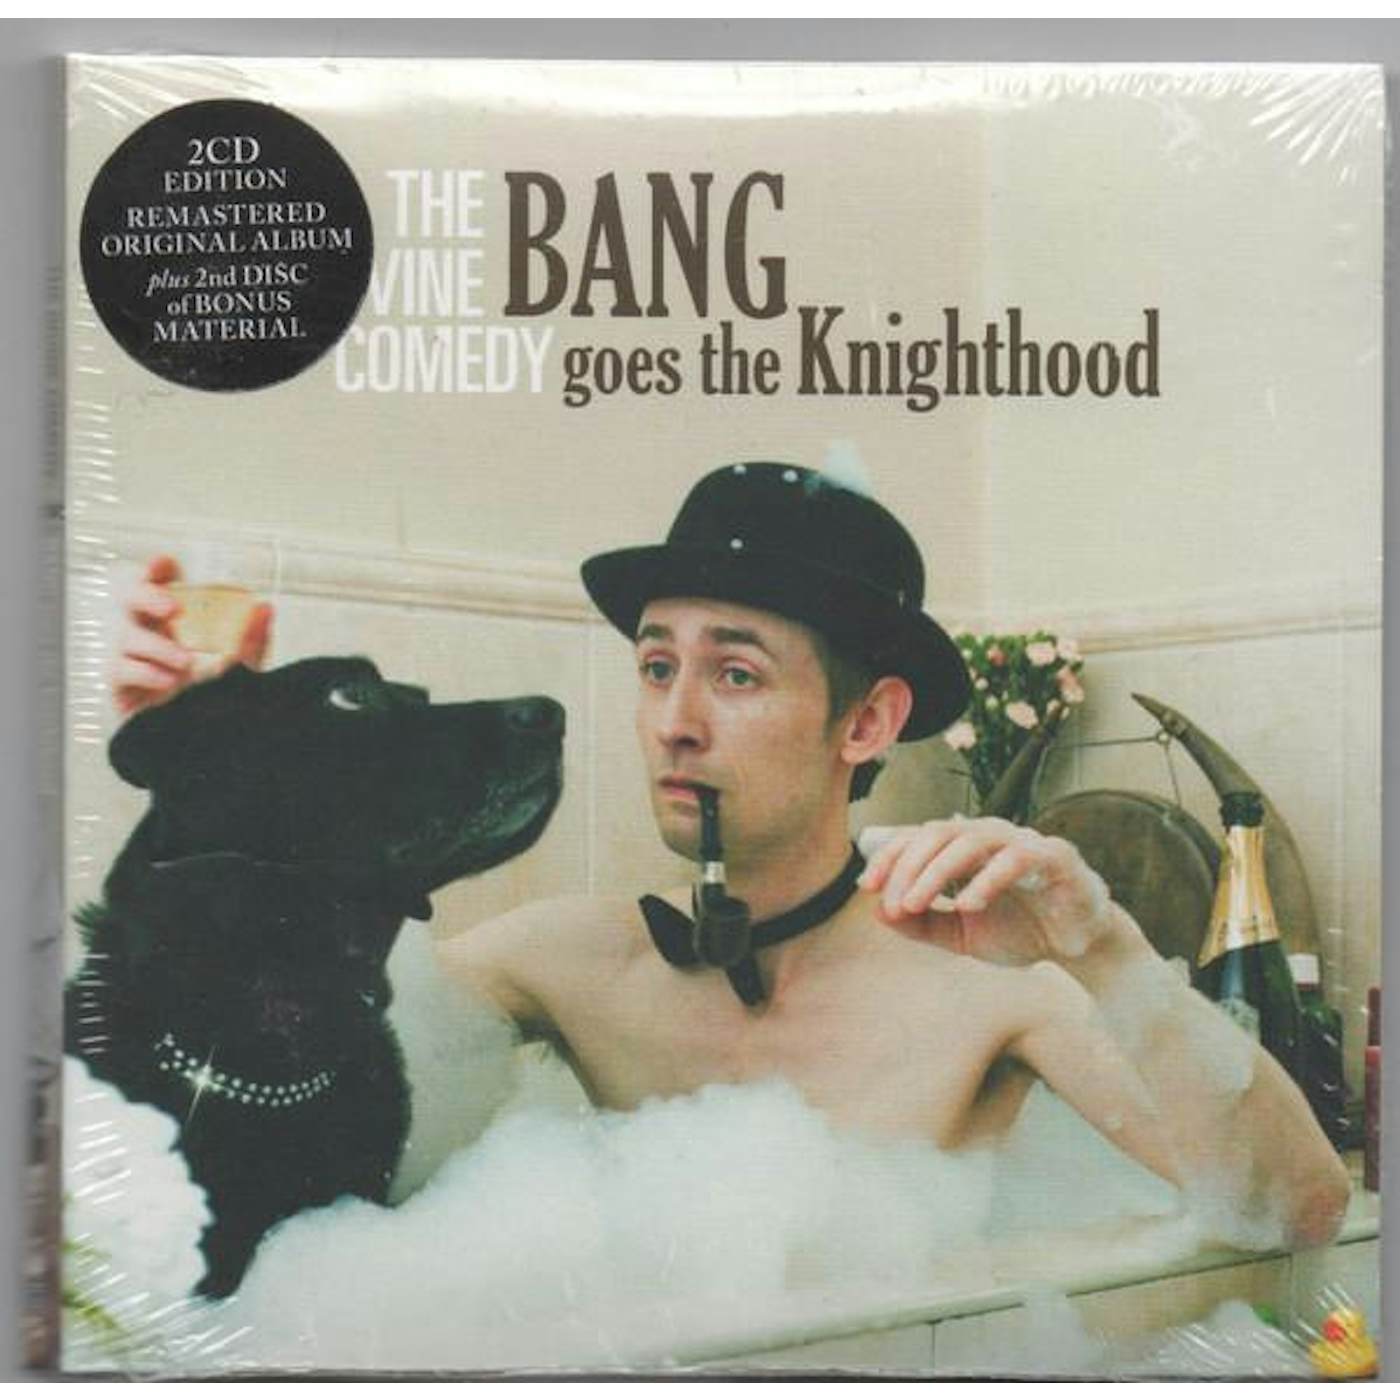 The Divine Comedy BANG GOES THE KNIGHTHOOD CD